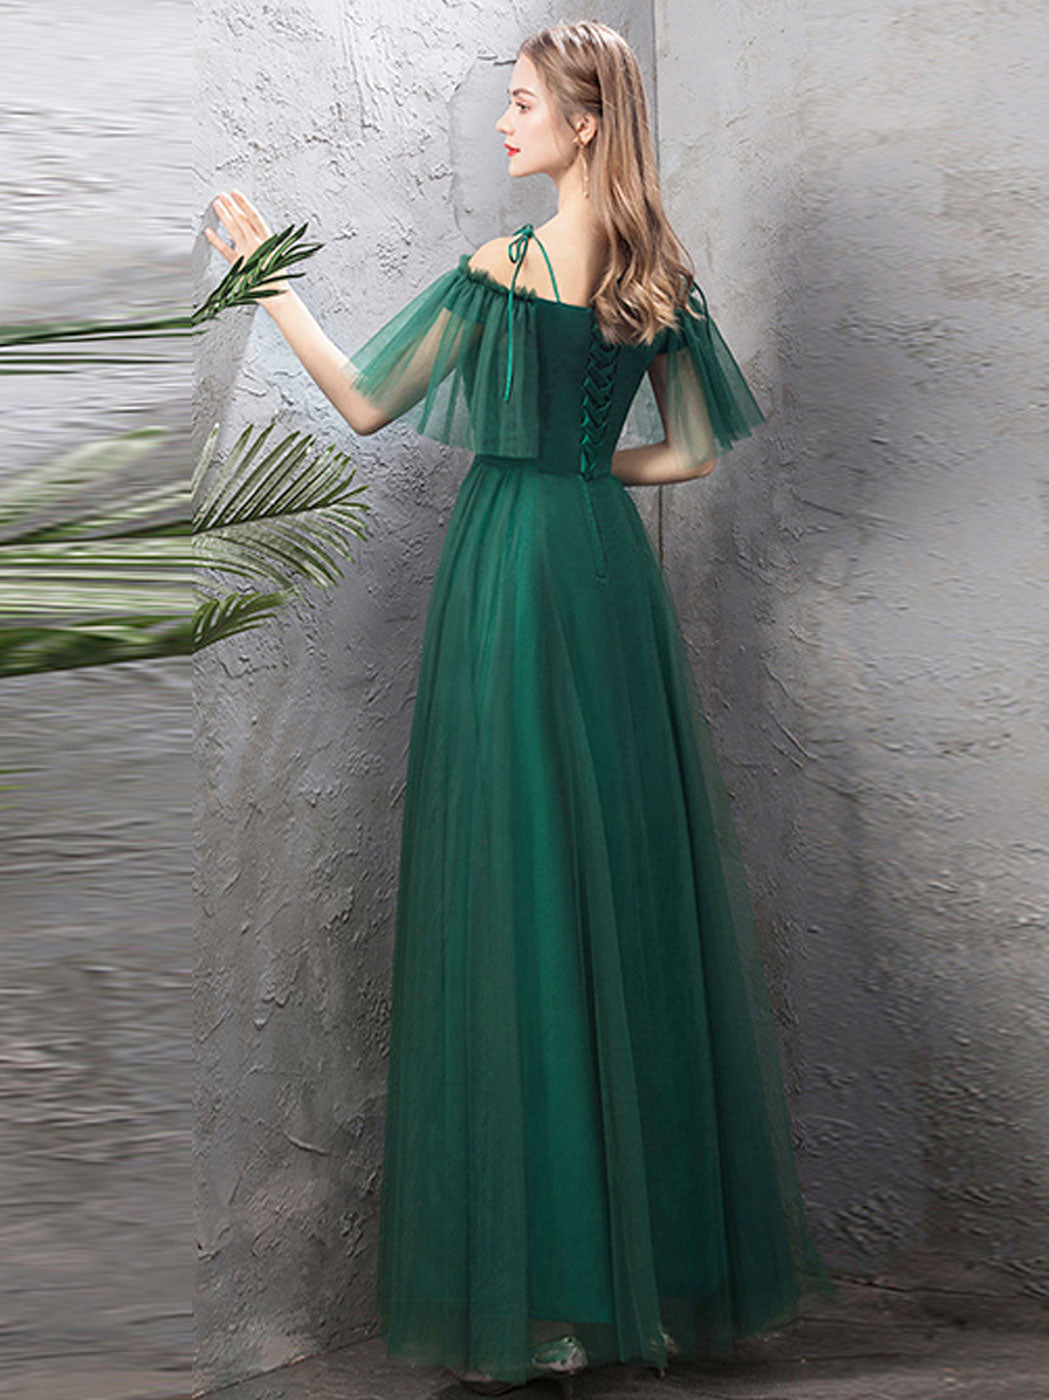 Hunter Green Tulle A-line Long Prom Dress Formal Dress - DollyGown